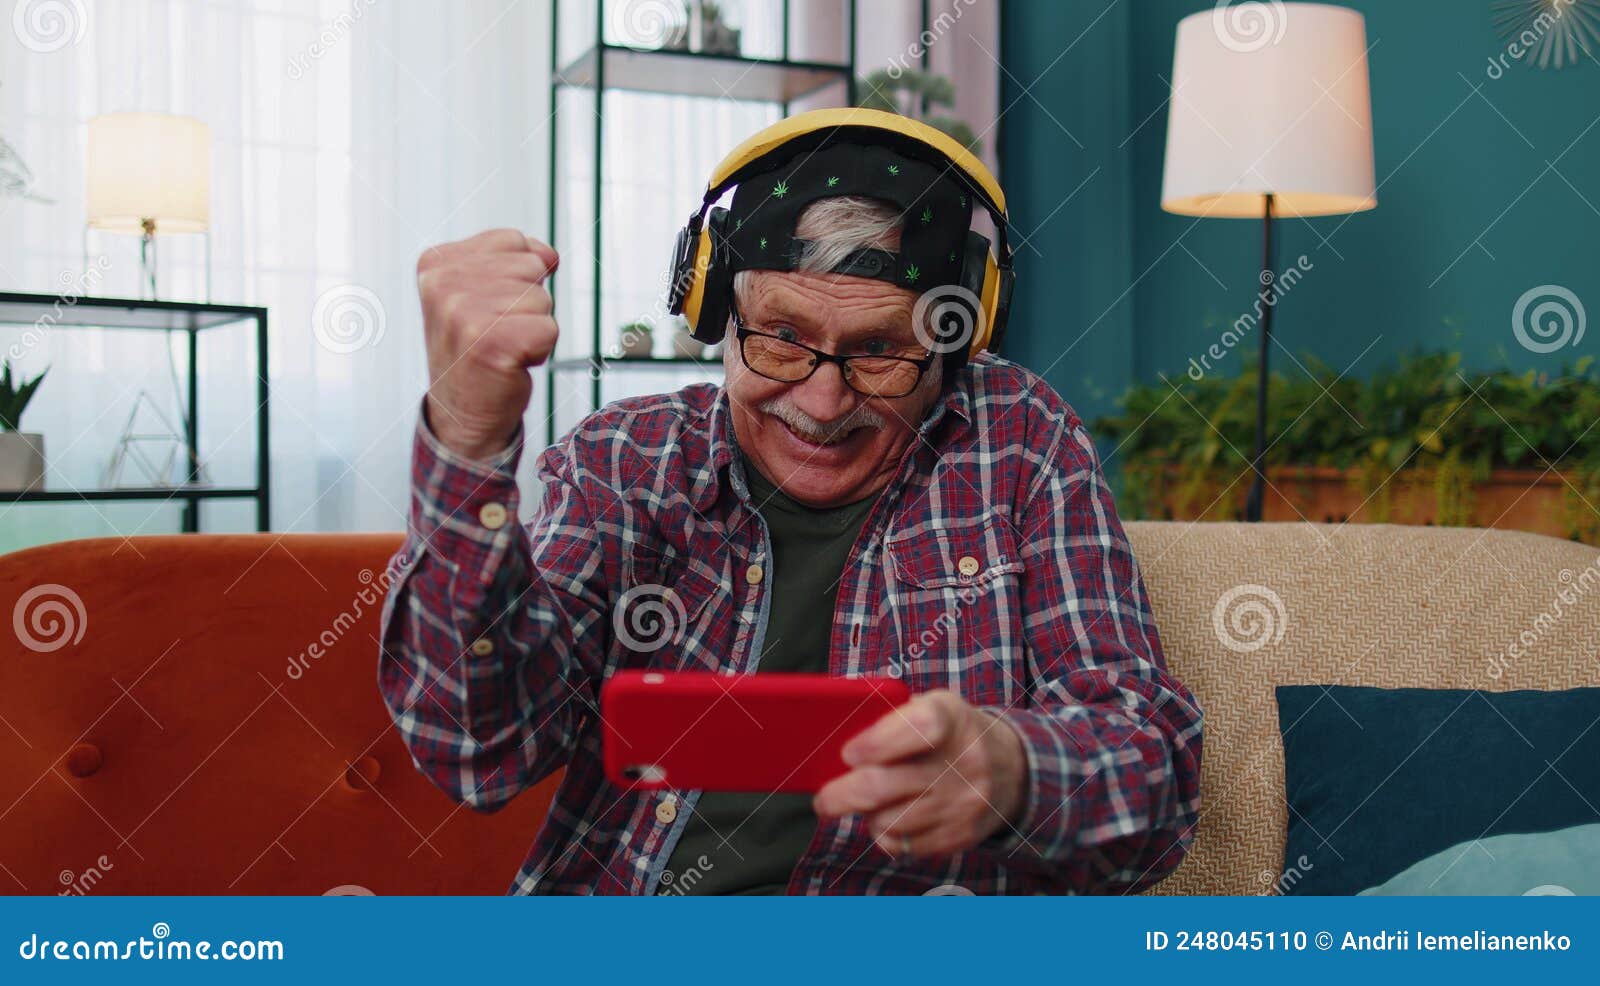 Worried Funny Senior Old Grandfather Man Playing Shooter Online Video Games on Mobile Phone at Home Stock Photo